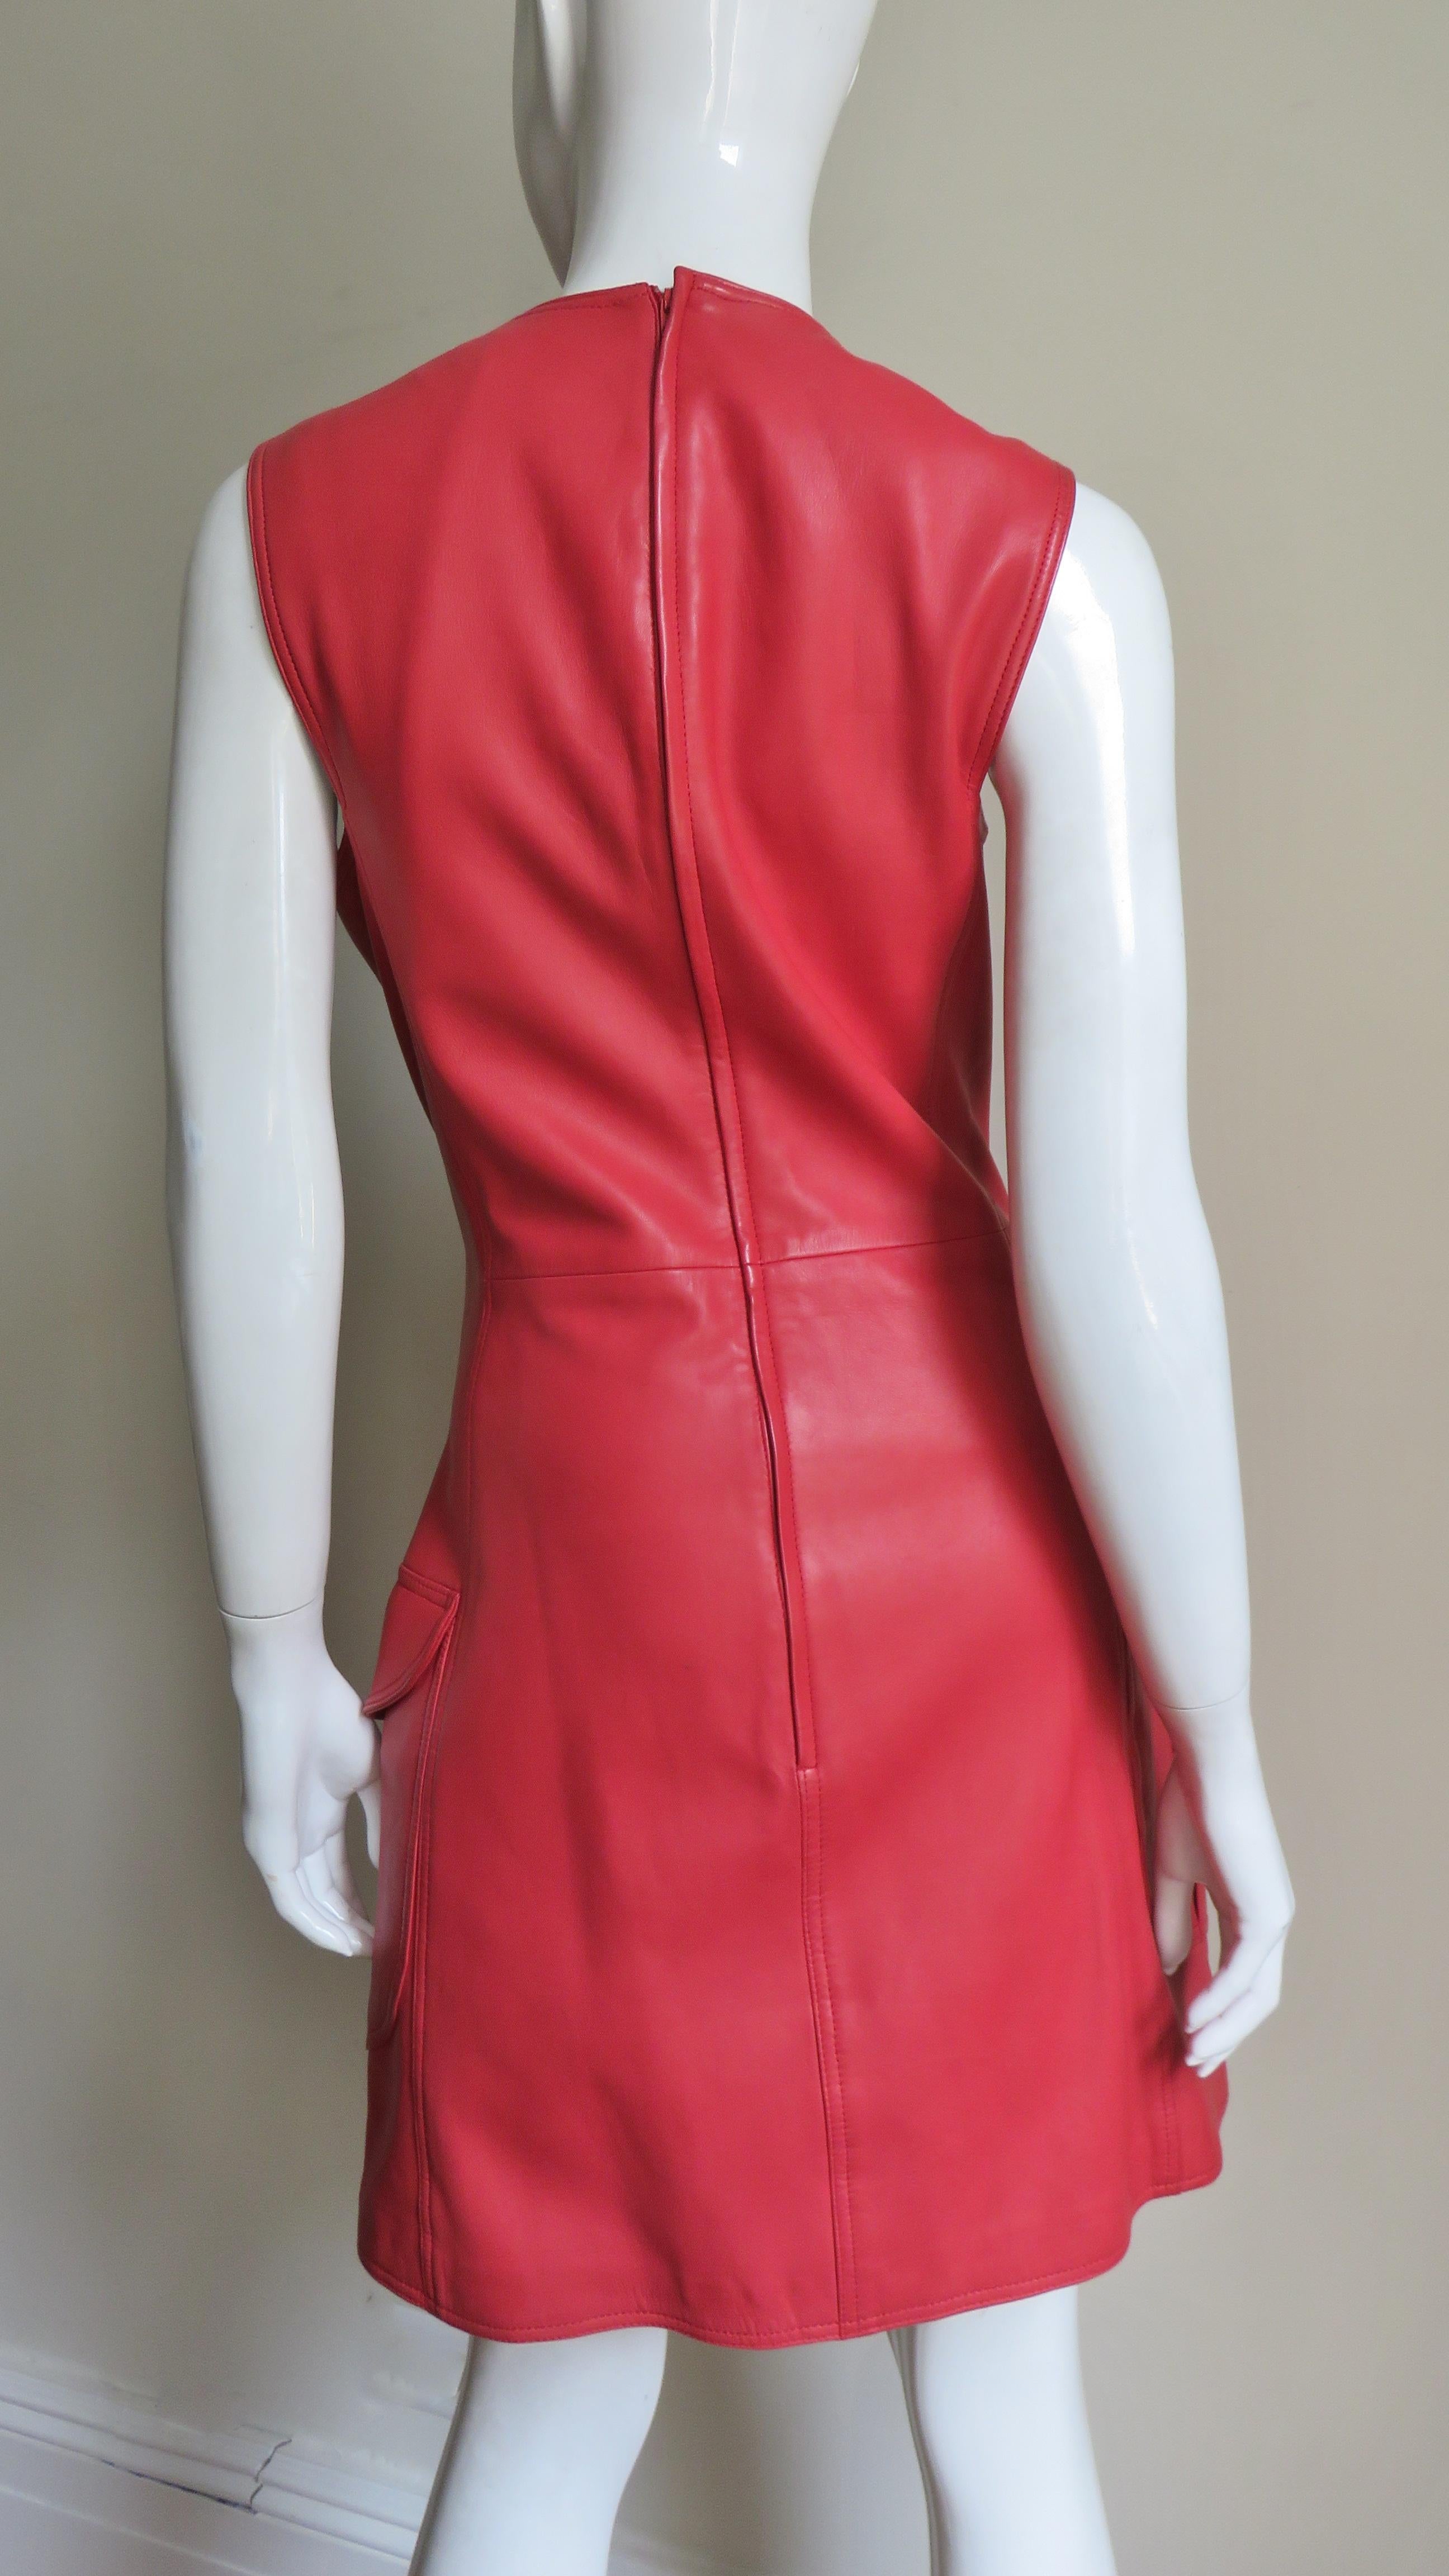 Gianni Versace New F/W 1996 Red Leather Dress For Sale 2